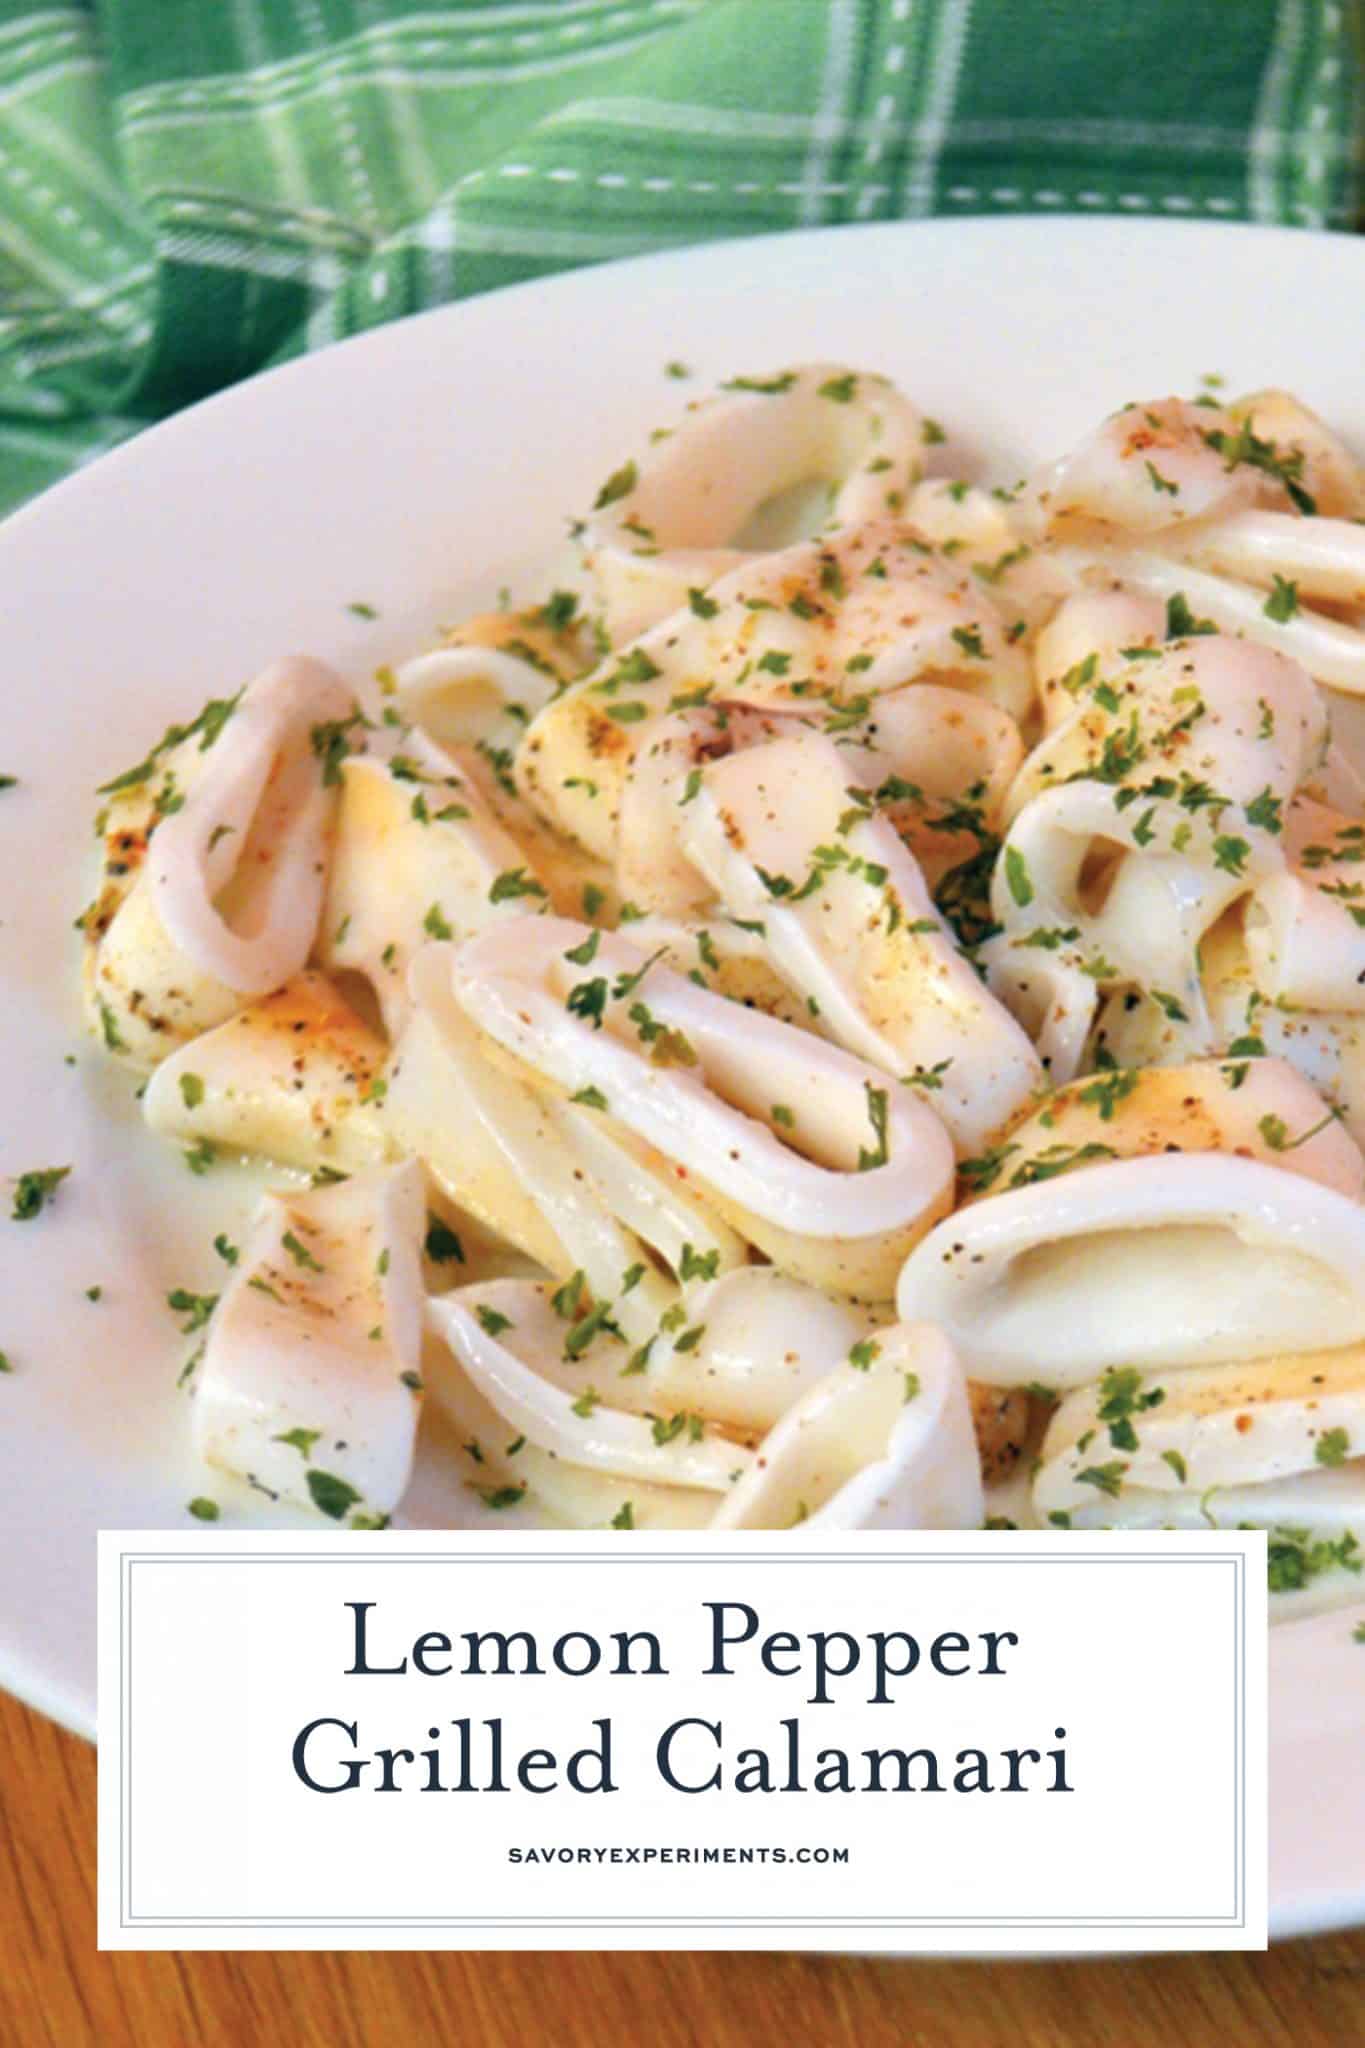 Lemon Pepper Grilled Calamari brings the flavors of the sea right to your dinner table. You won't be disappointed by this mouth-watering recipe. #grilledcalamari #calamari www.savoryexperiments.com